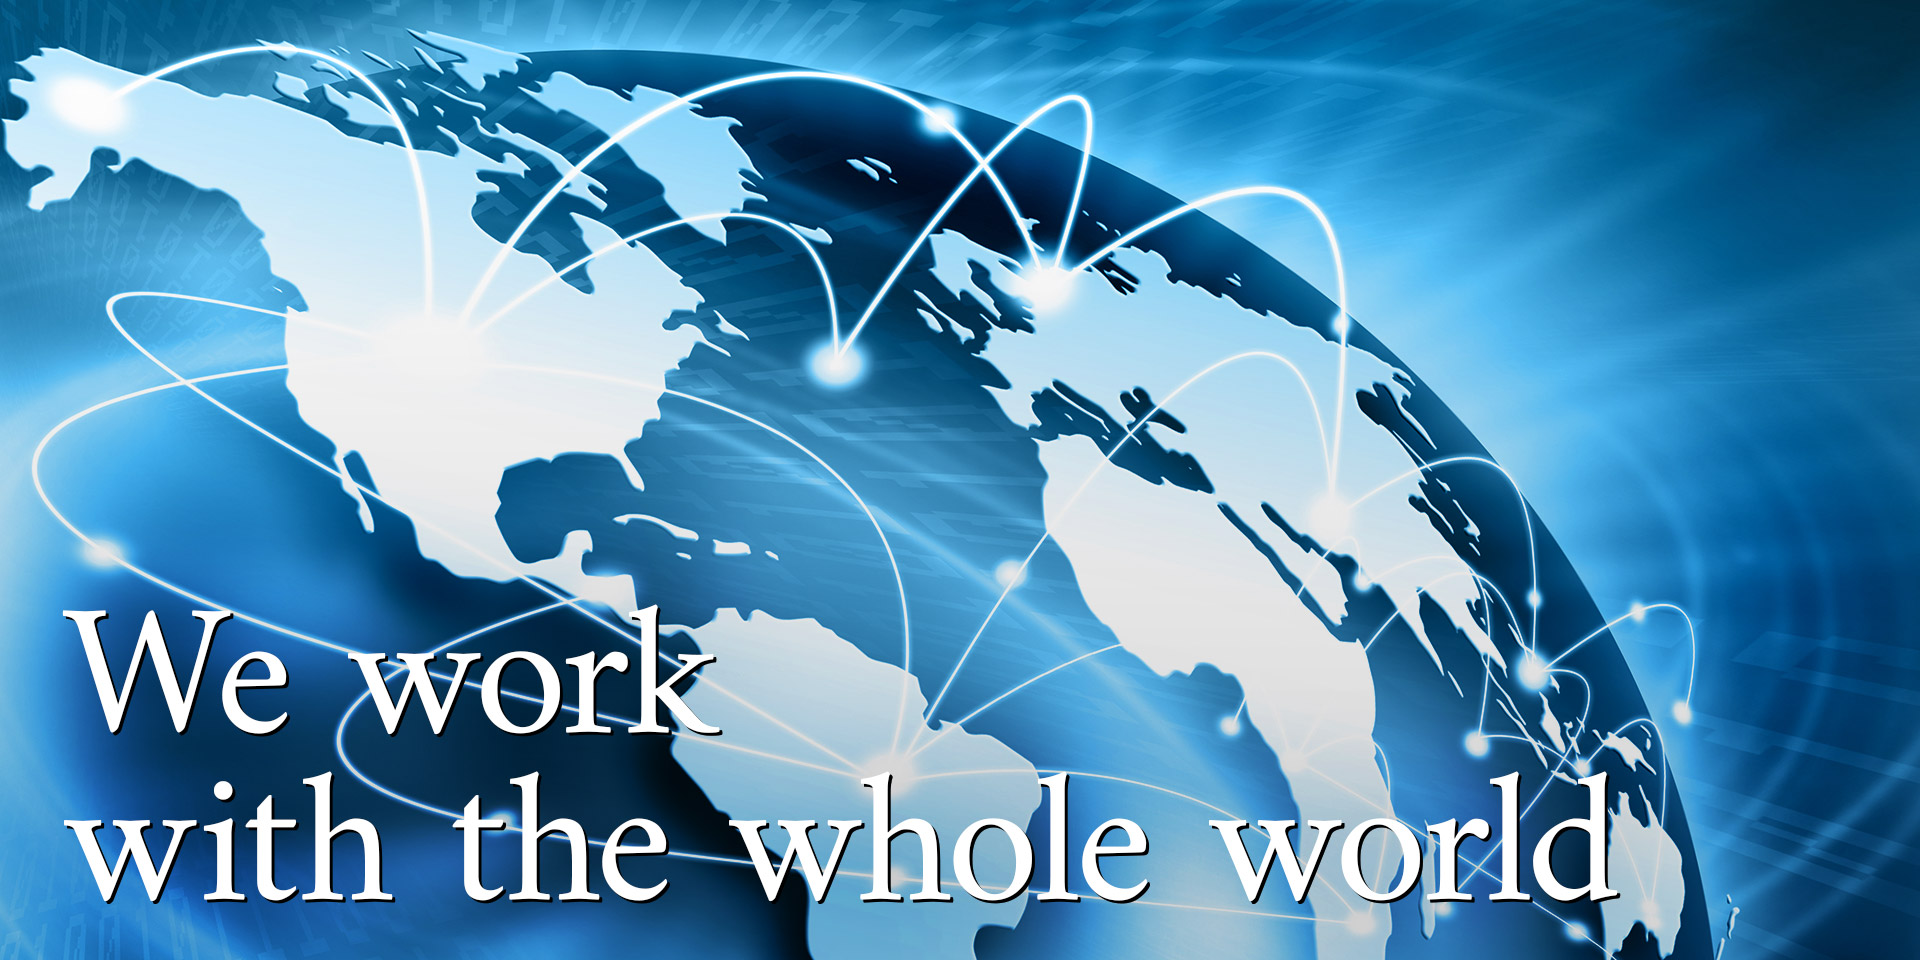 We Work with the whole world